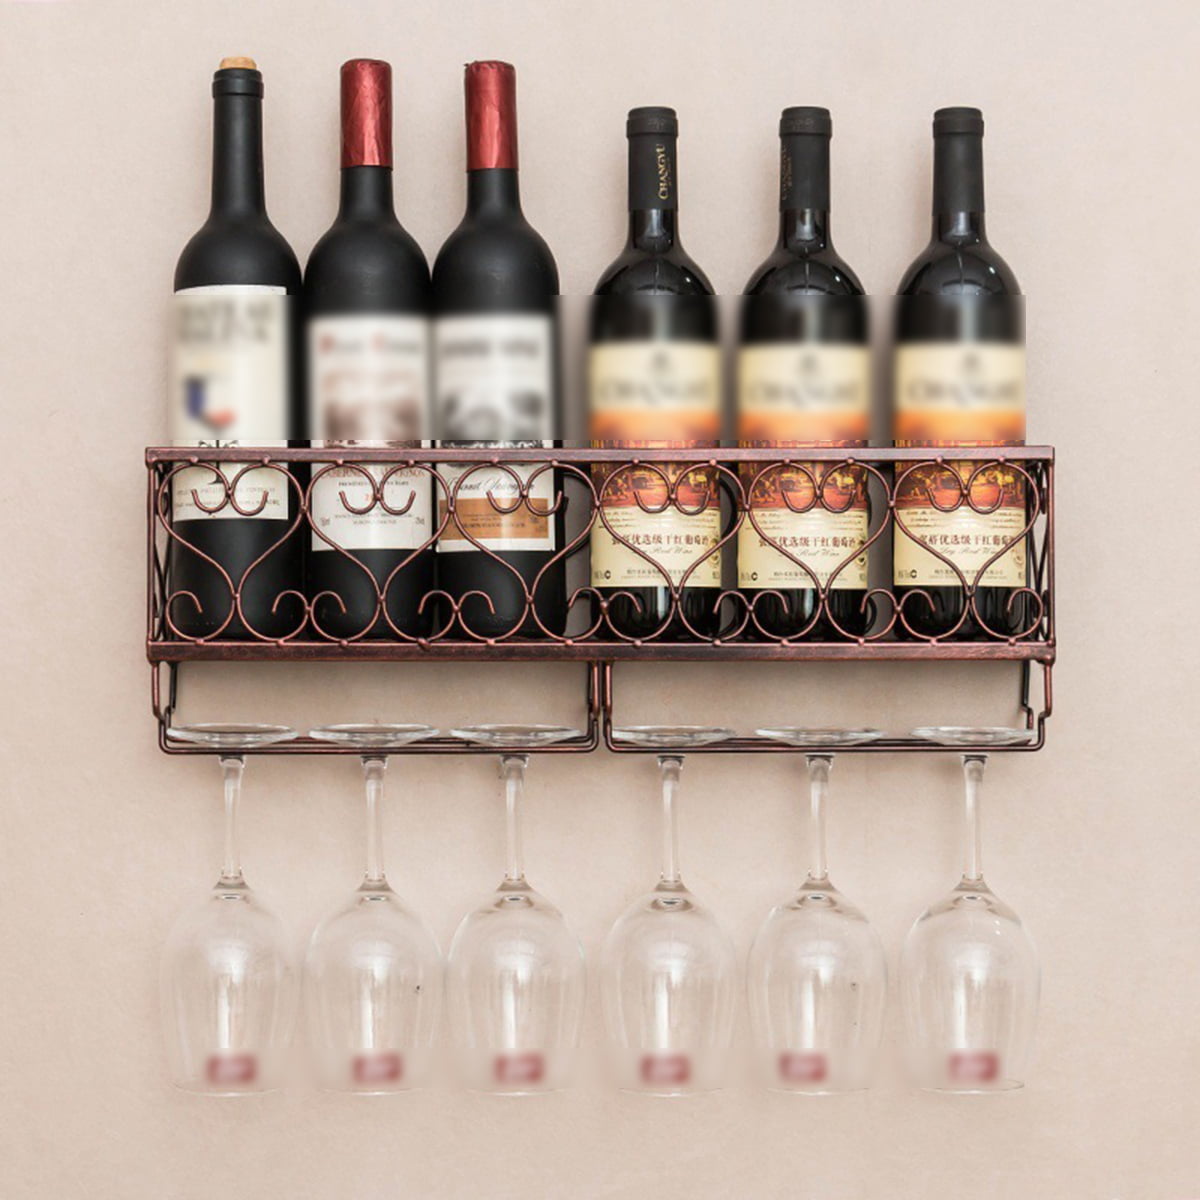 Warm Van Metal Wall Mounted Wine Rack for Bar,6 Long Stem Bottle and Glass Holder for Home Kitchen or Dining,Wine Accessories Cork Storage Organization Store 